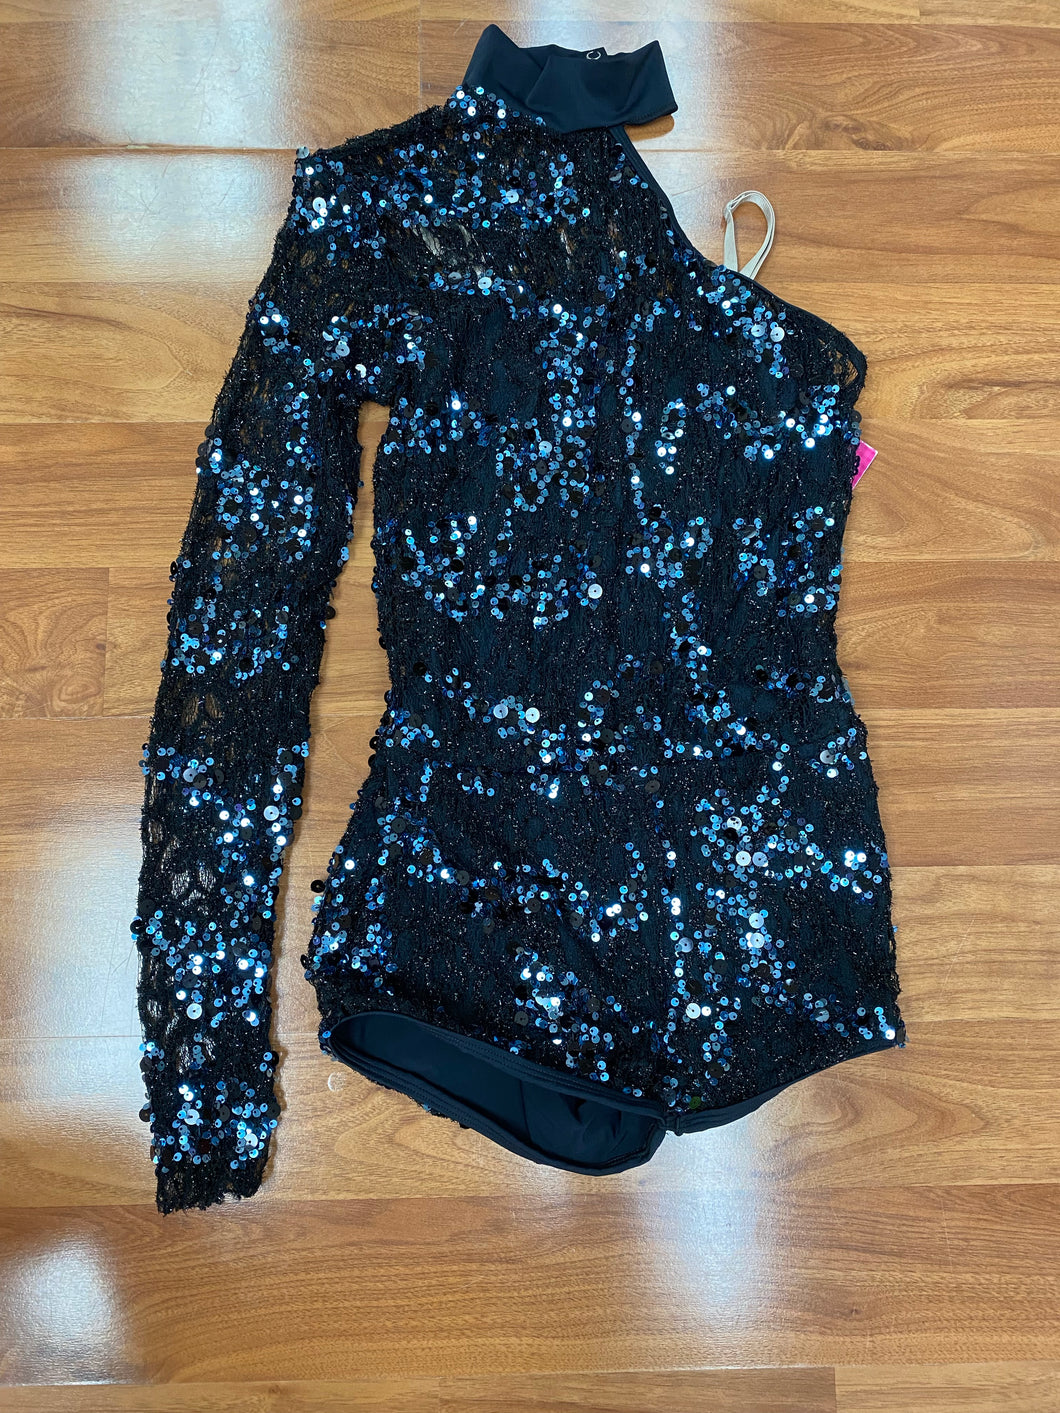 One Sleeve Black Jumpsuit with Blue Glitter Costume